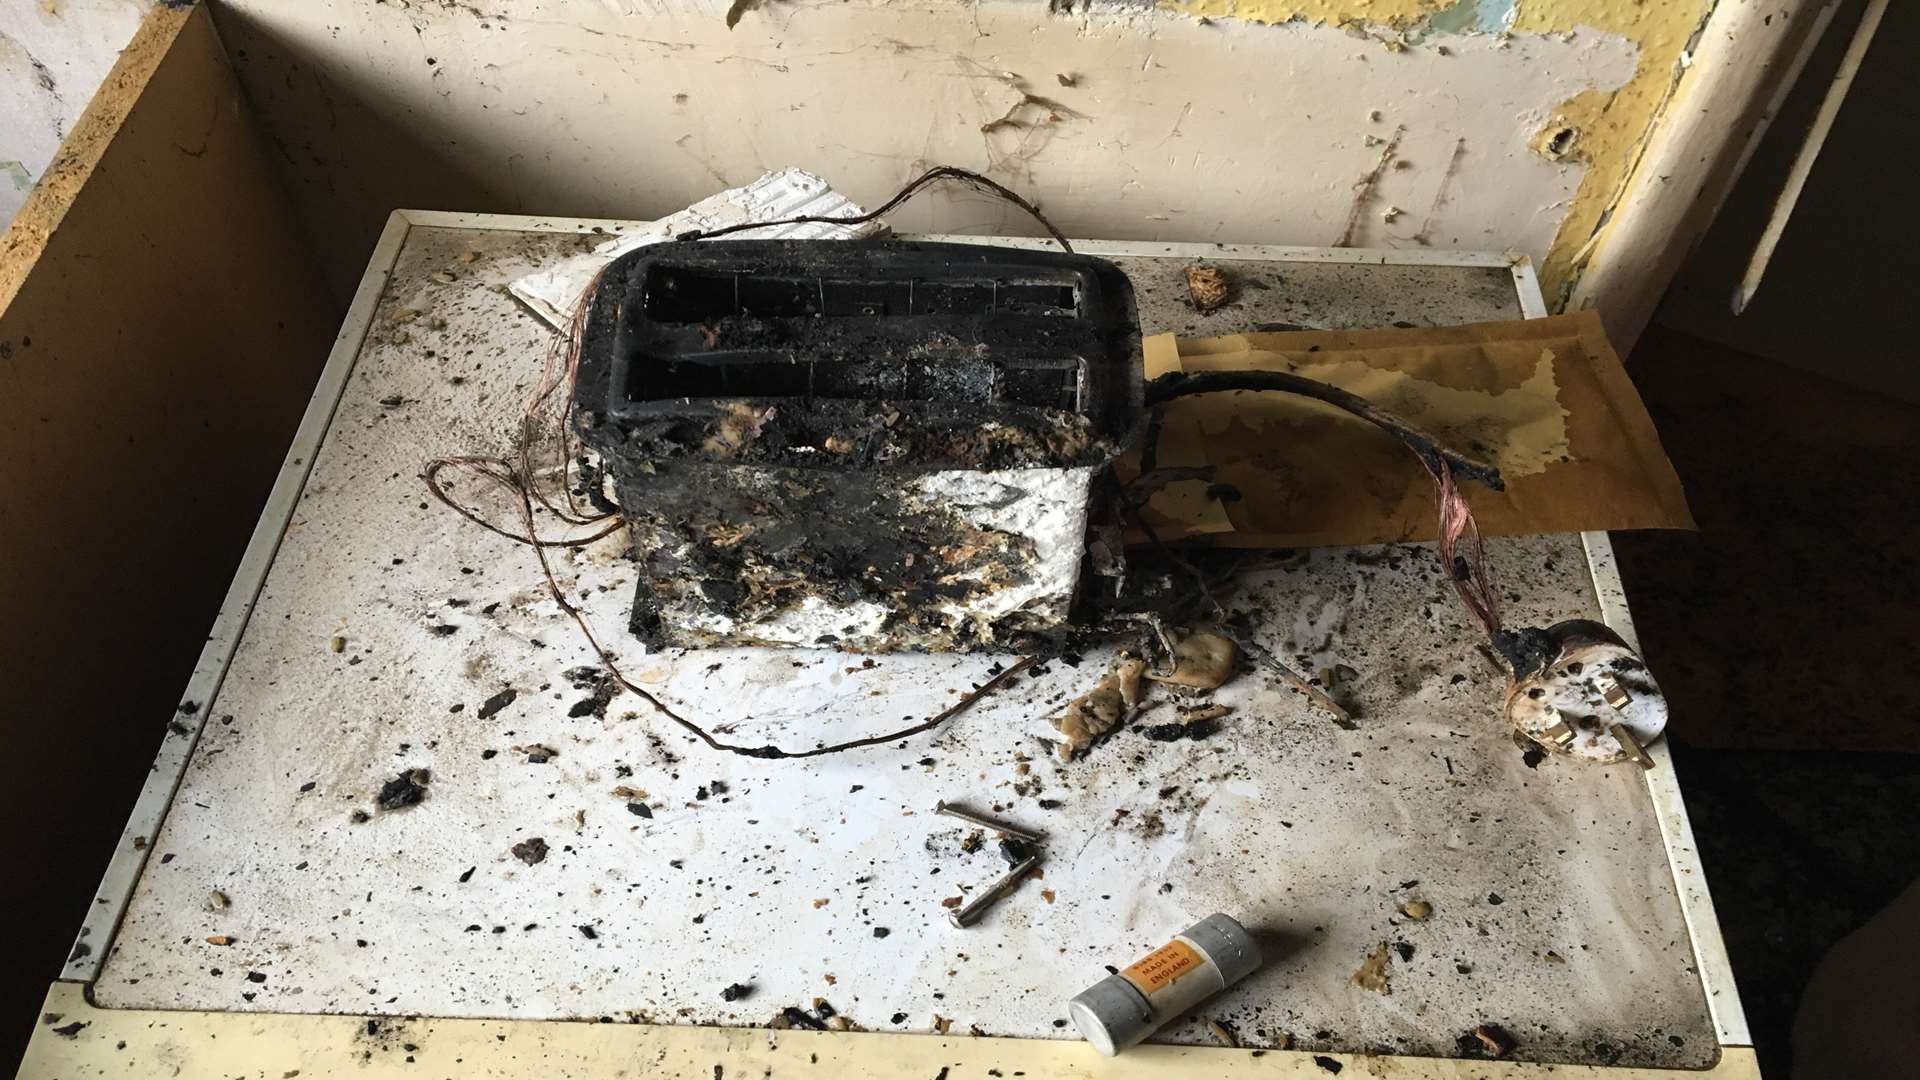 Sharon Carr said a toaster was the cause of the fire at her home